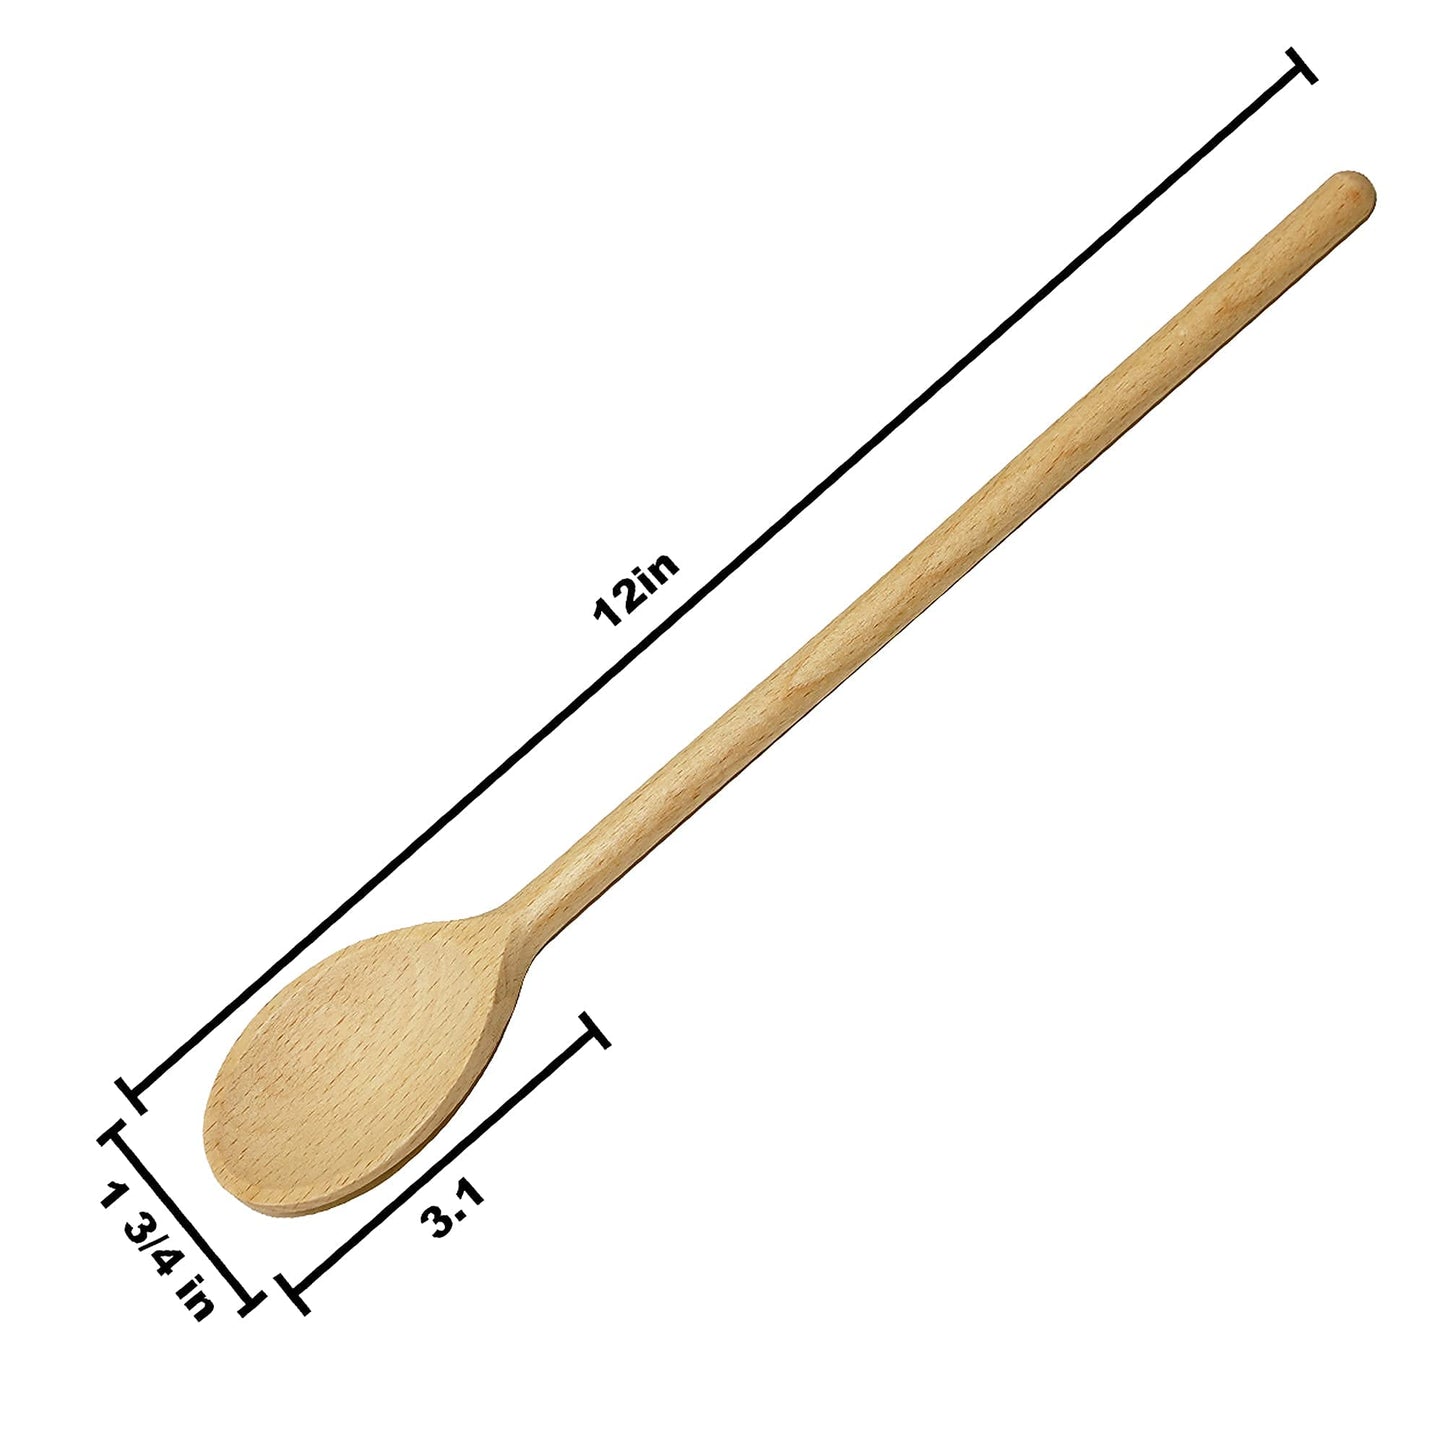 BICB Oval Wooden Spoons for Cooking, Pack of 6 (12-Inch Long) Solid Natural Beechwood Cookware for Stirring, Mixing, Tasting, Serving Food, Craft,